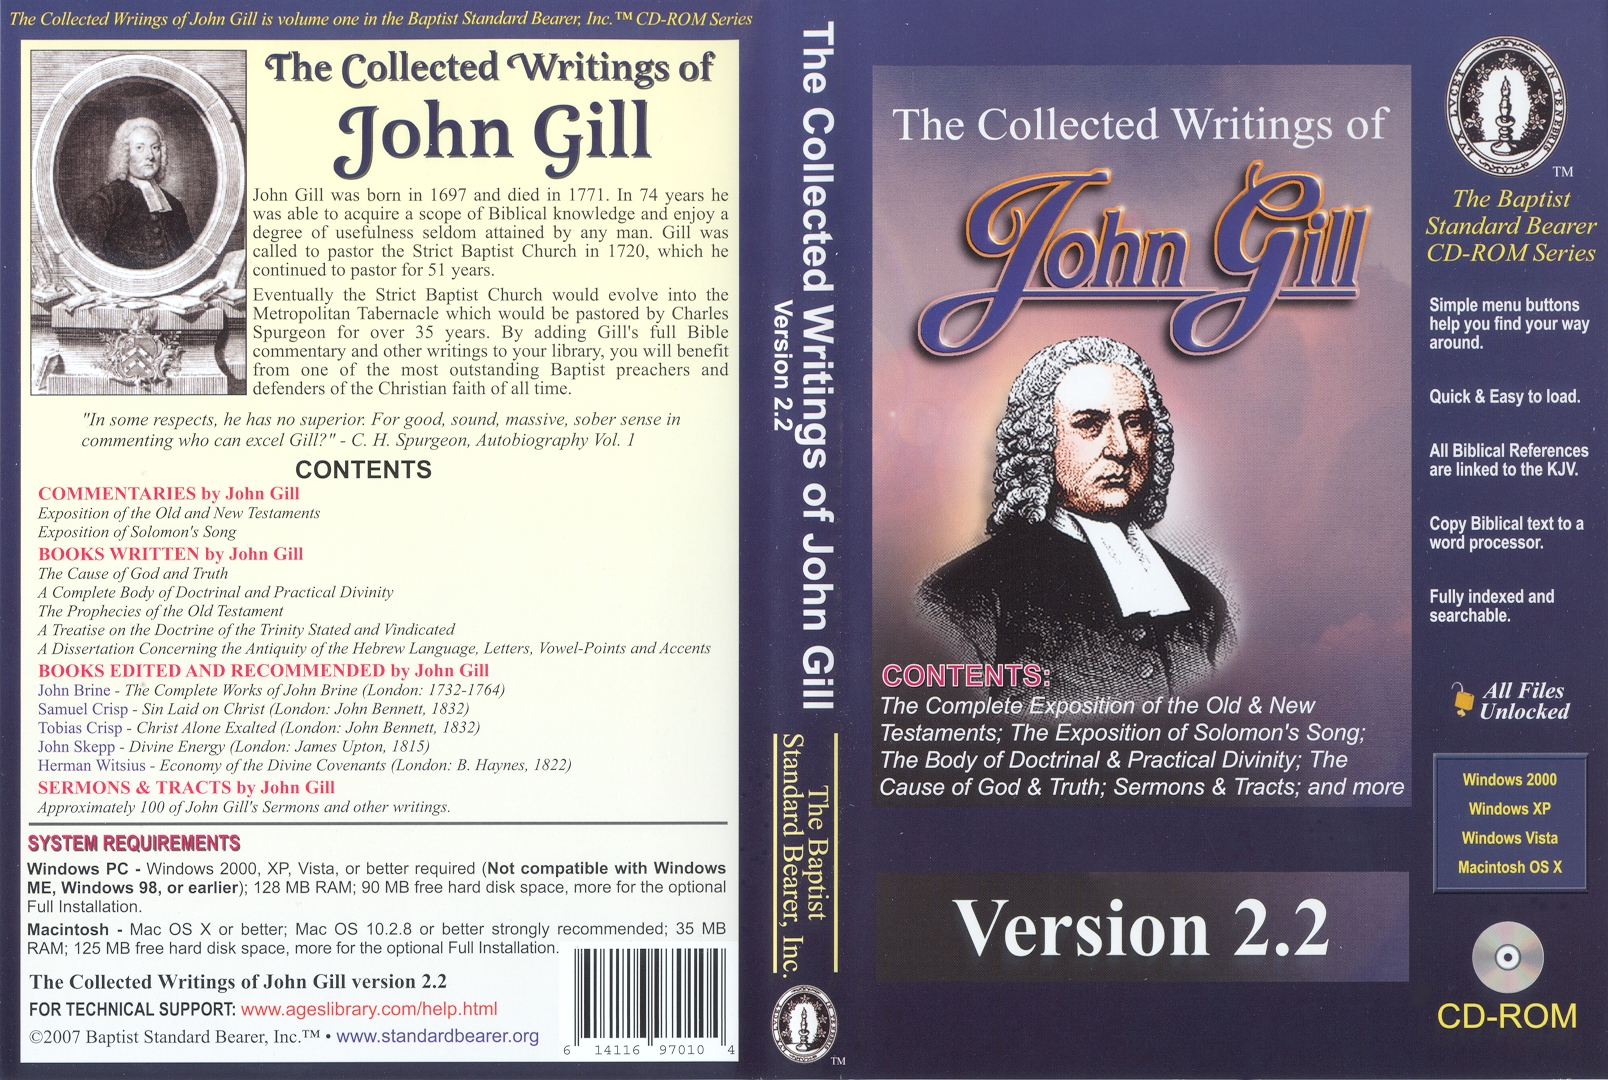 The Collected Writings of John Gill (CD-ROM)